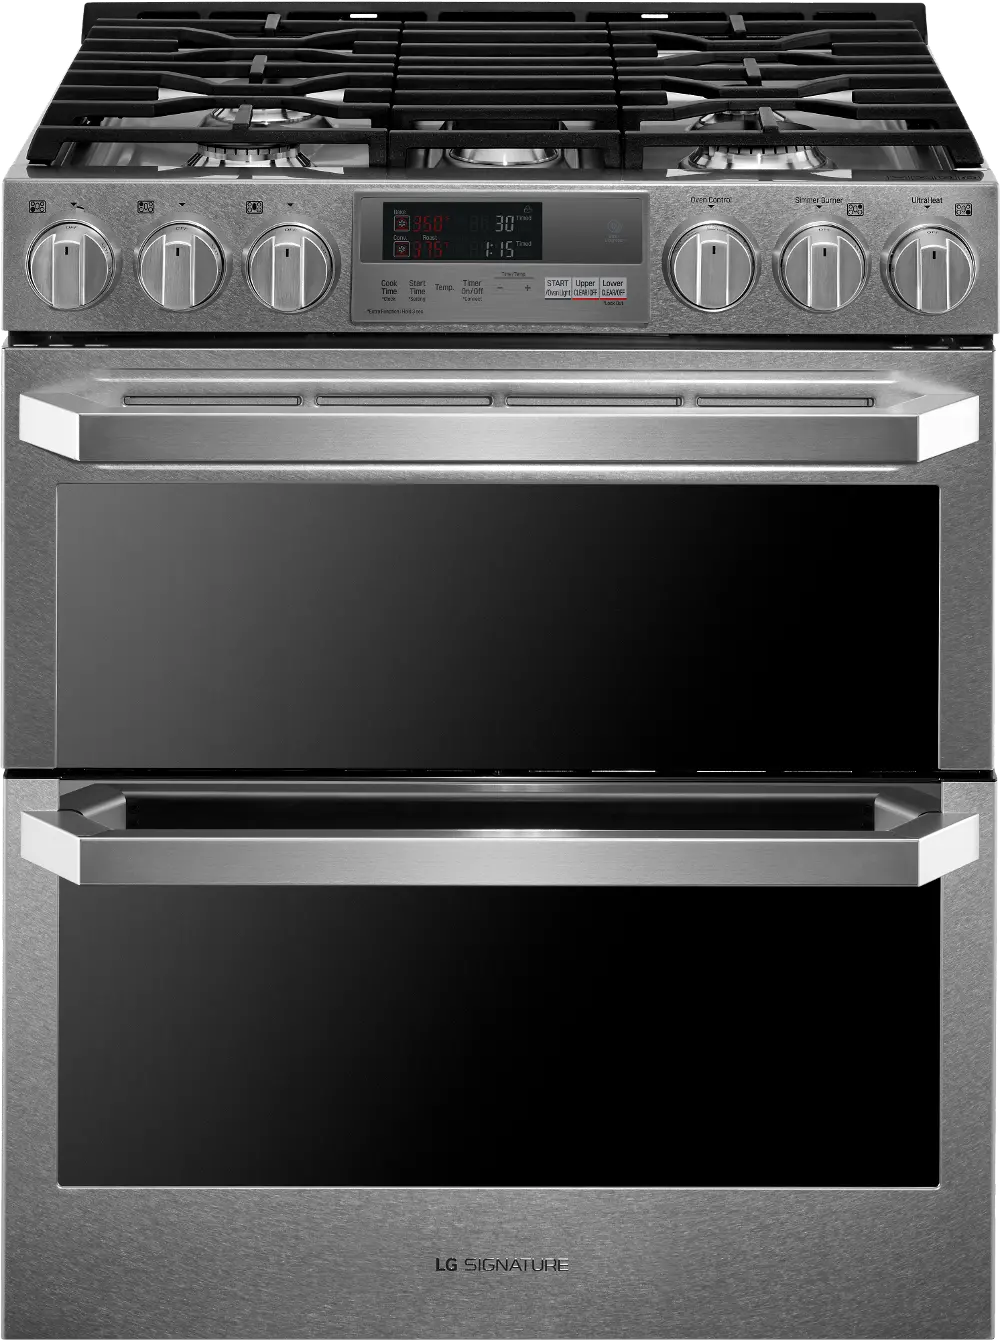 LUTD4919SN LG Signature 7.3 cu ft Dual Fuel Double Oven Range - Stainless Steel-1